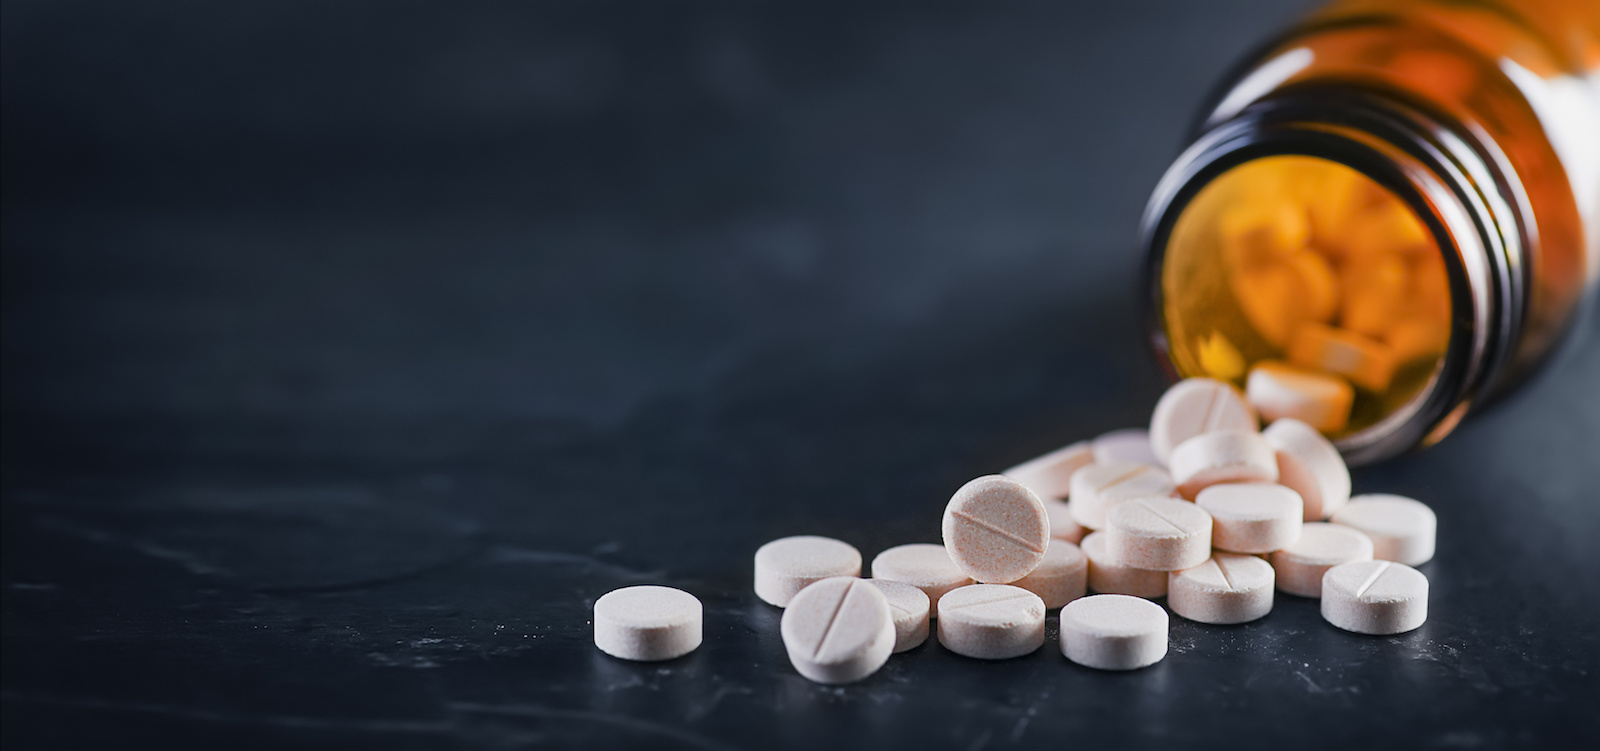 Vicodin Addiction: Side Effects & How To Know If You Are Addicted